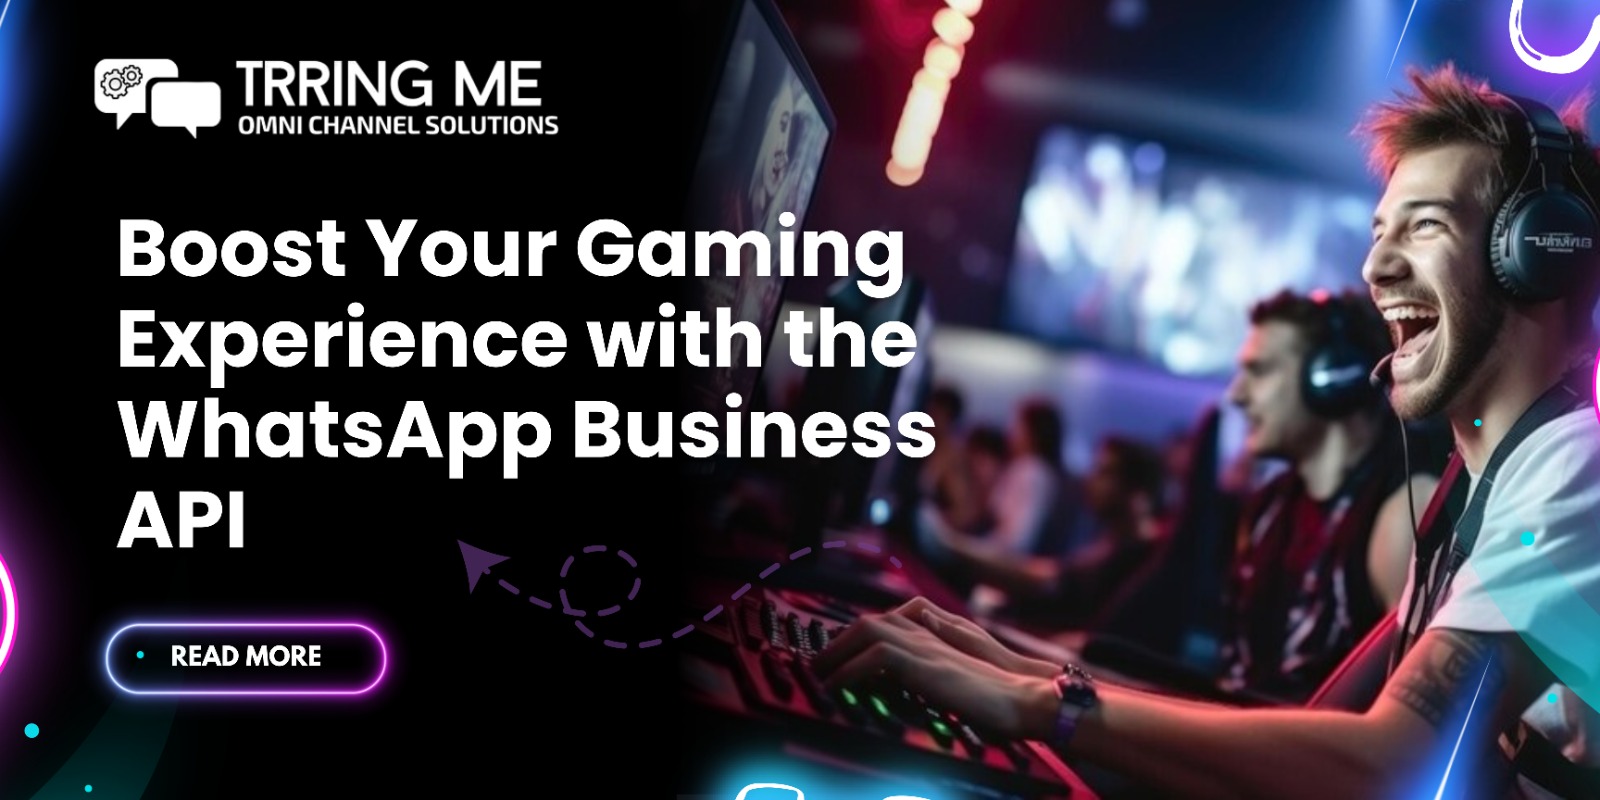 WhatsApp Business API for Gaming Industry